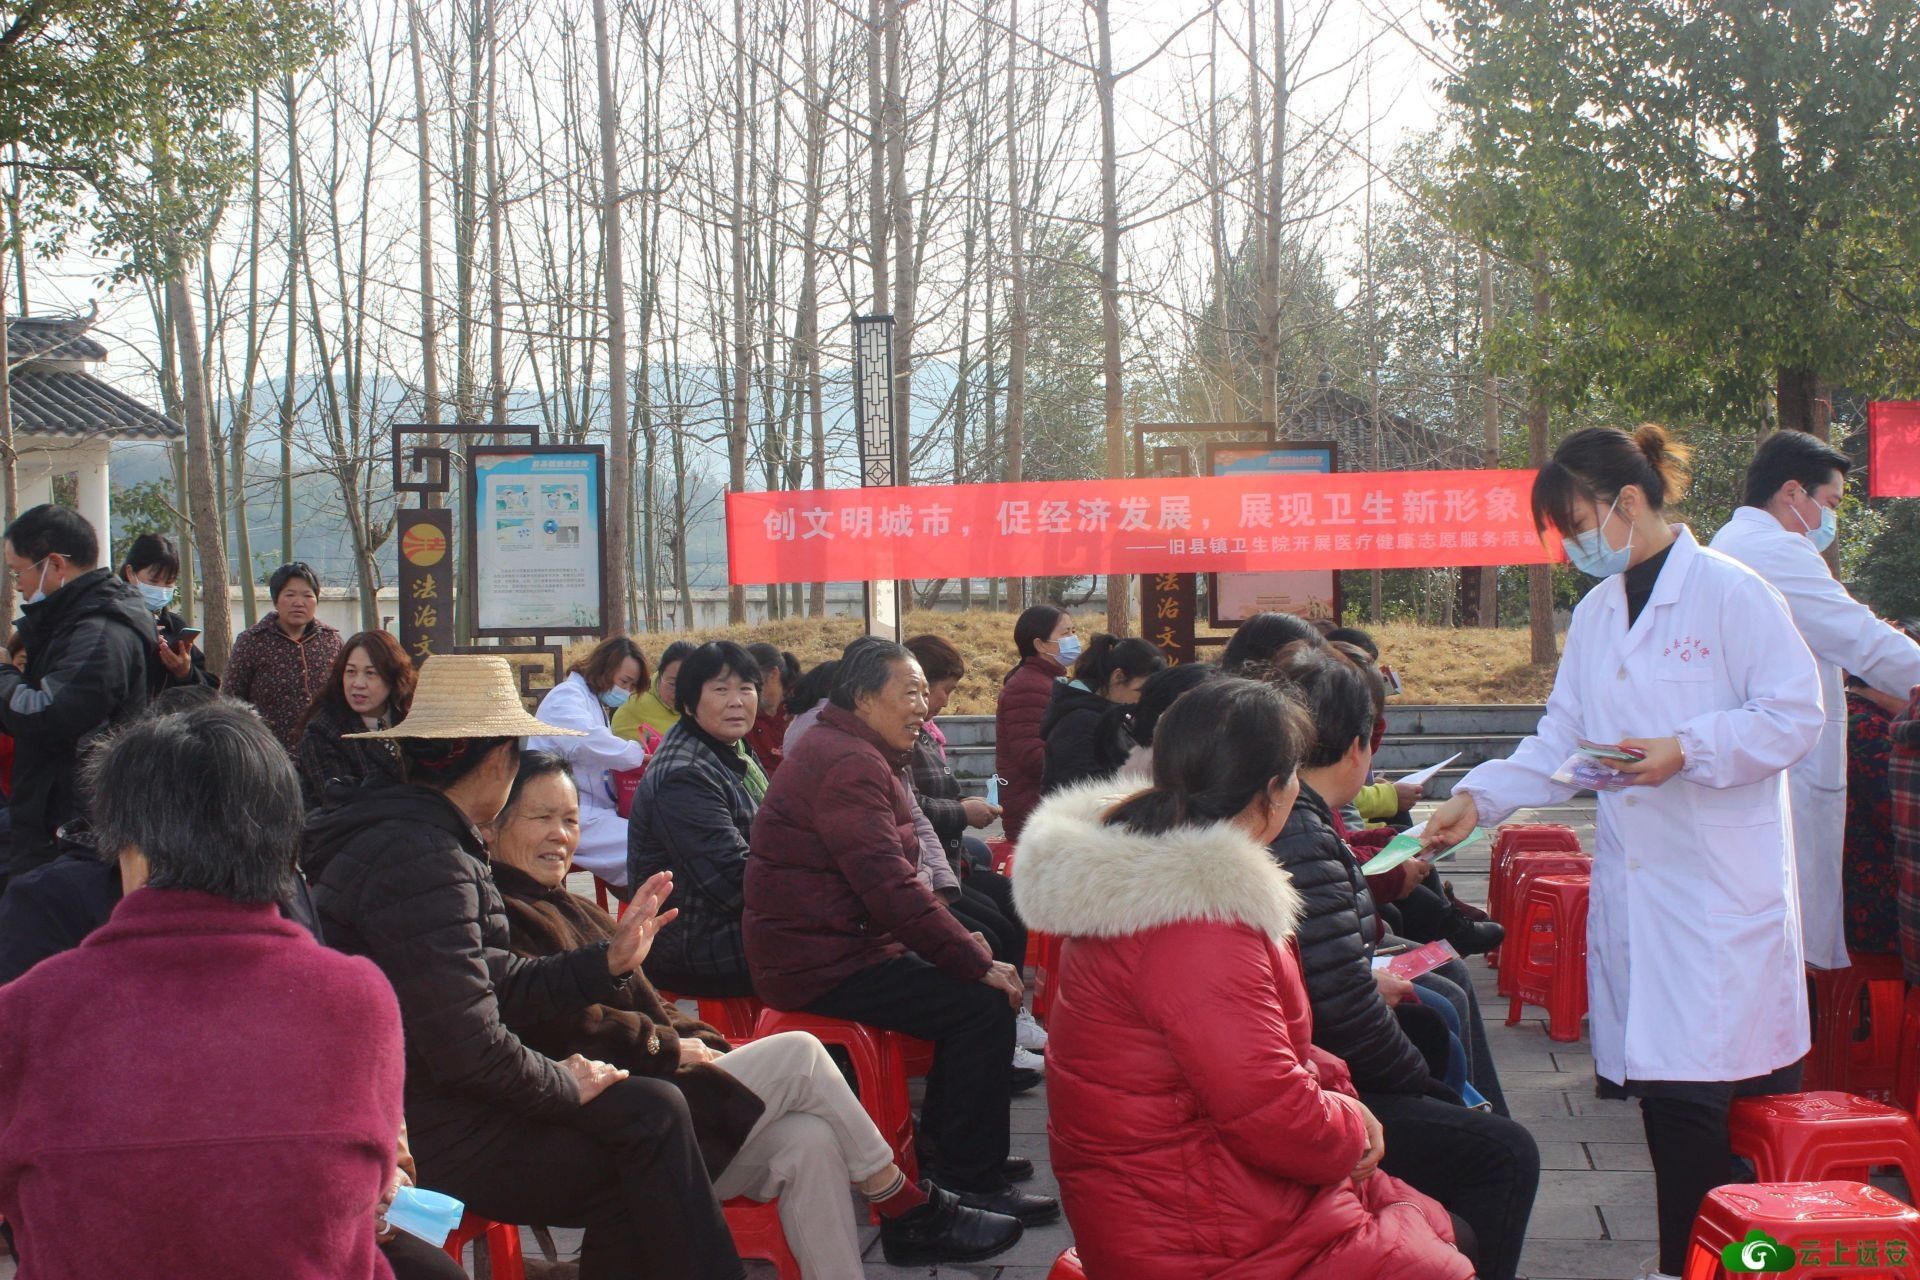 [Creating a National Civilized City] Jiuxian Township Health Center carries out health knowledge into villages and enterprises